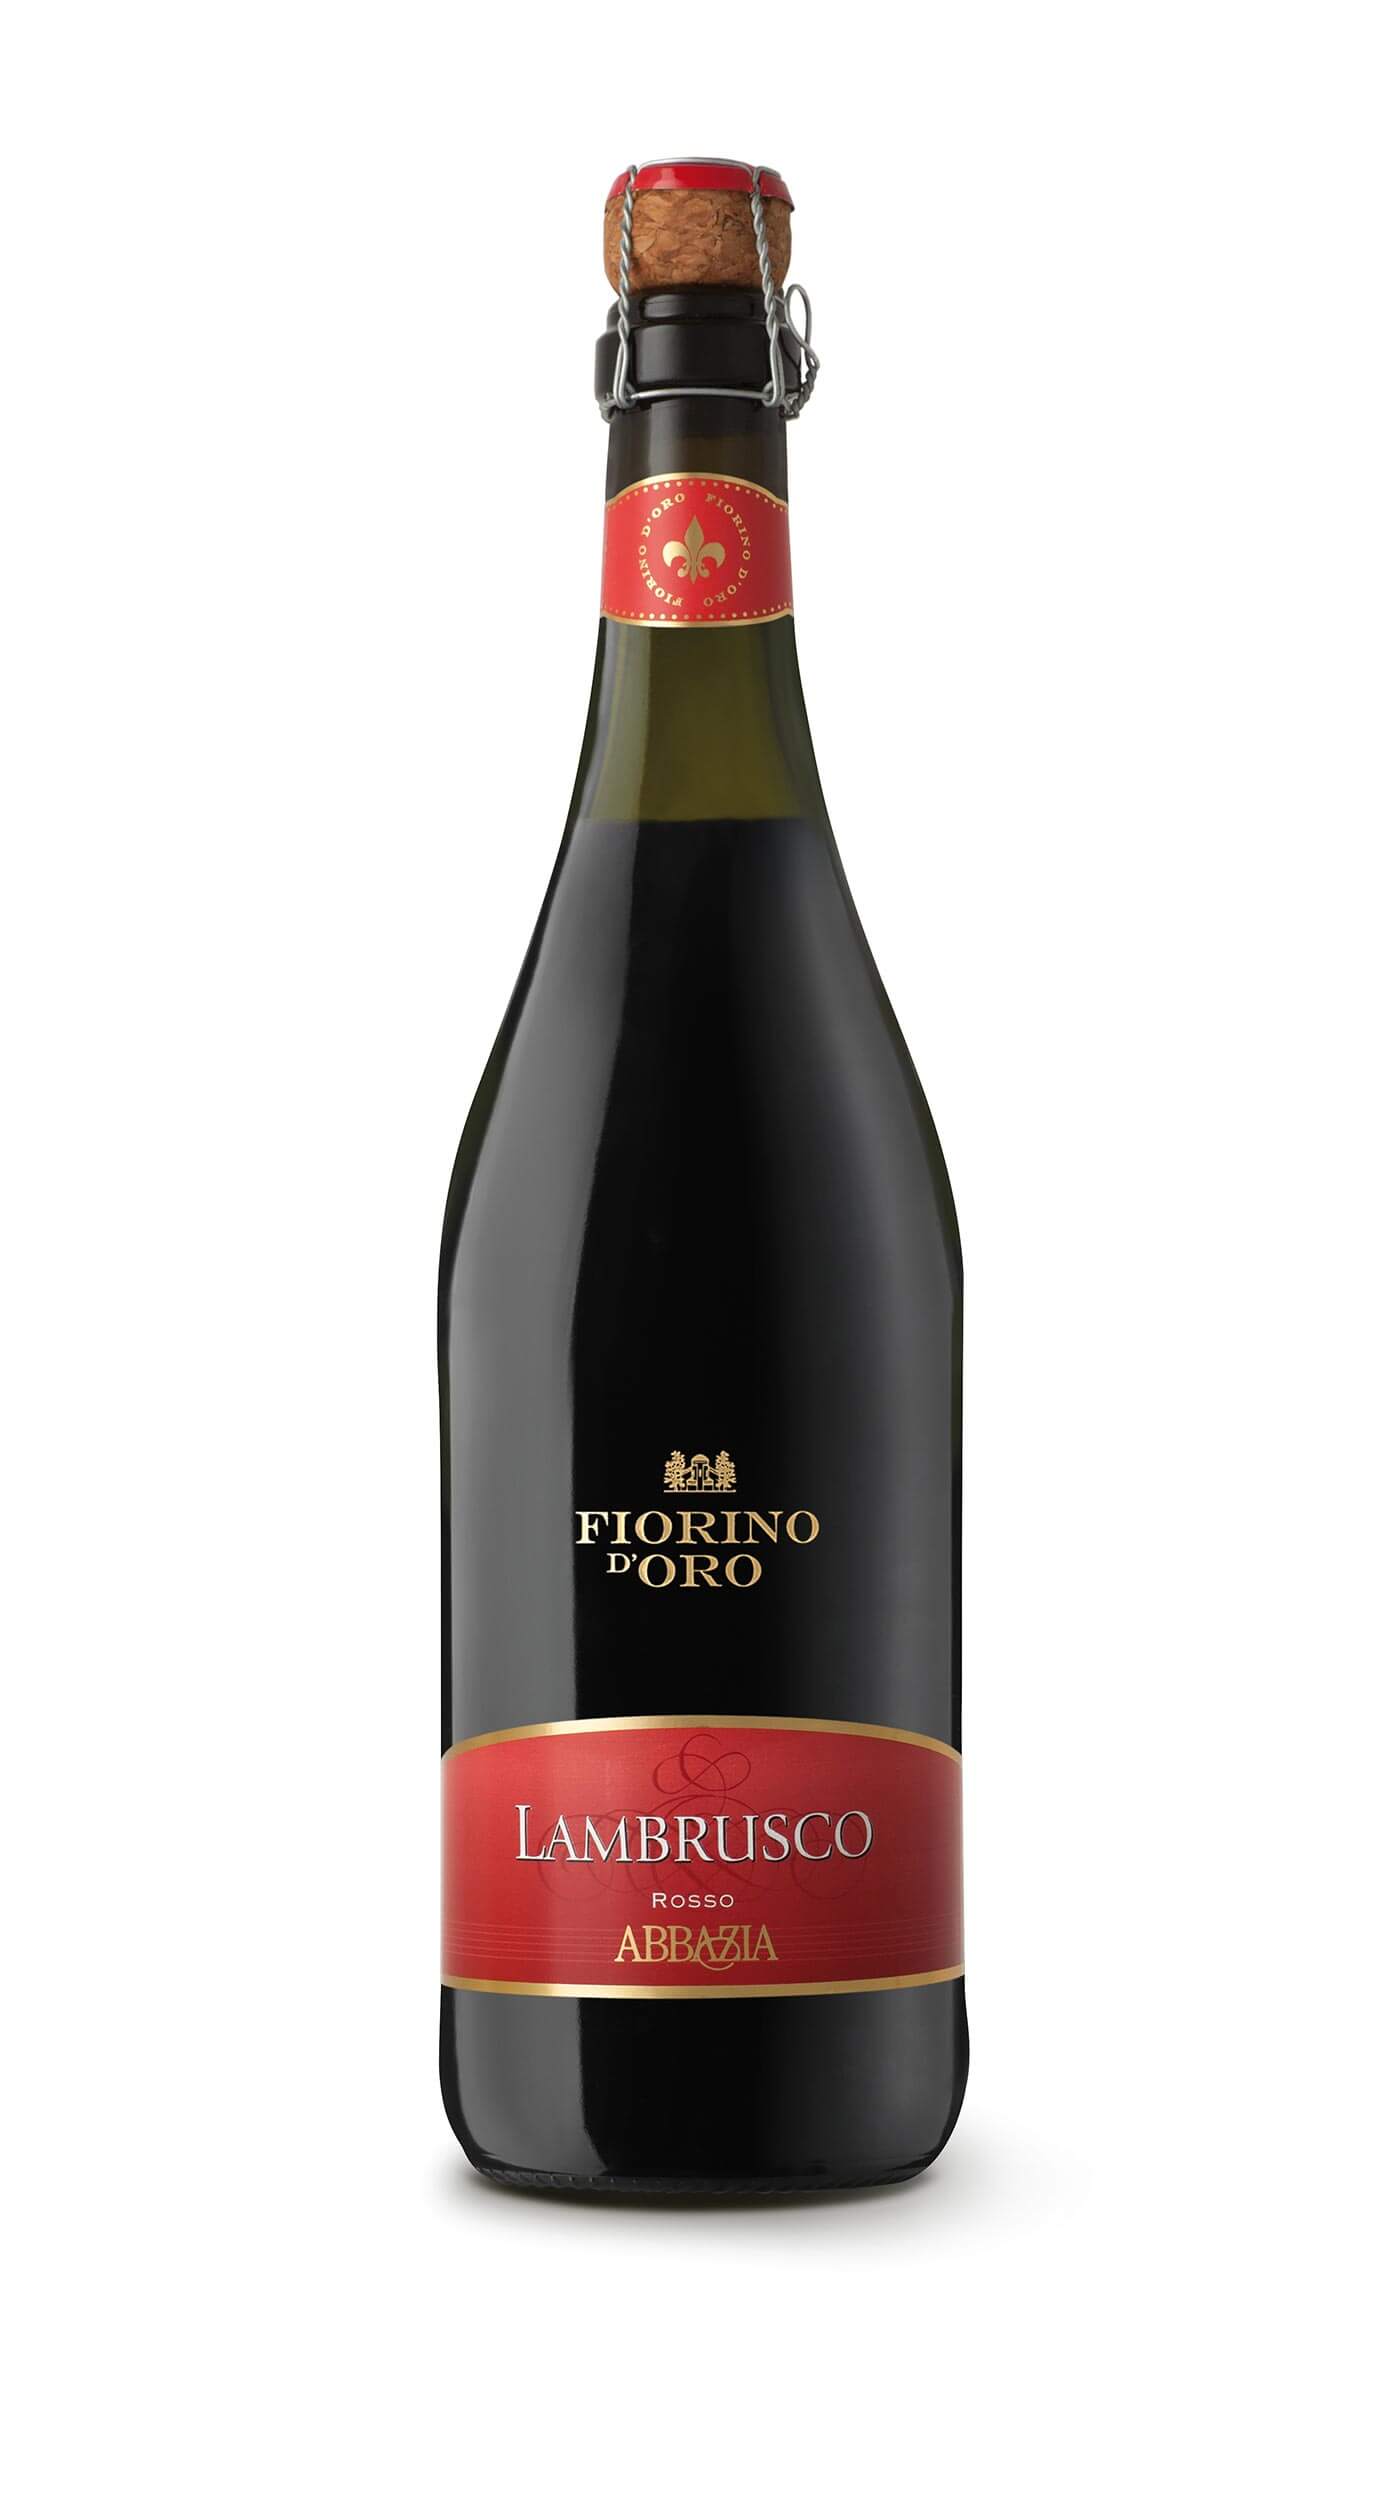 Emilia lambrusco dolce. Вино Ламбруско Dolce Rosso.